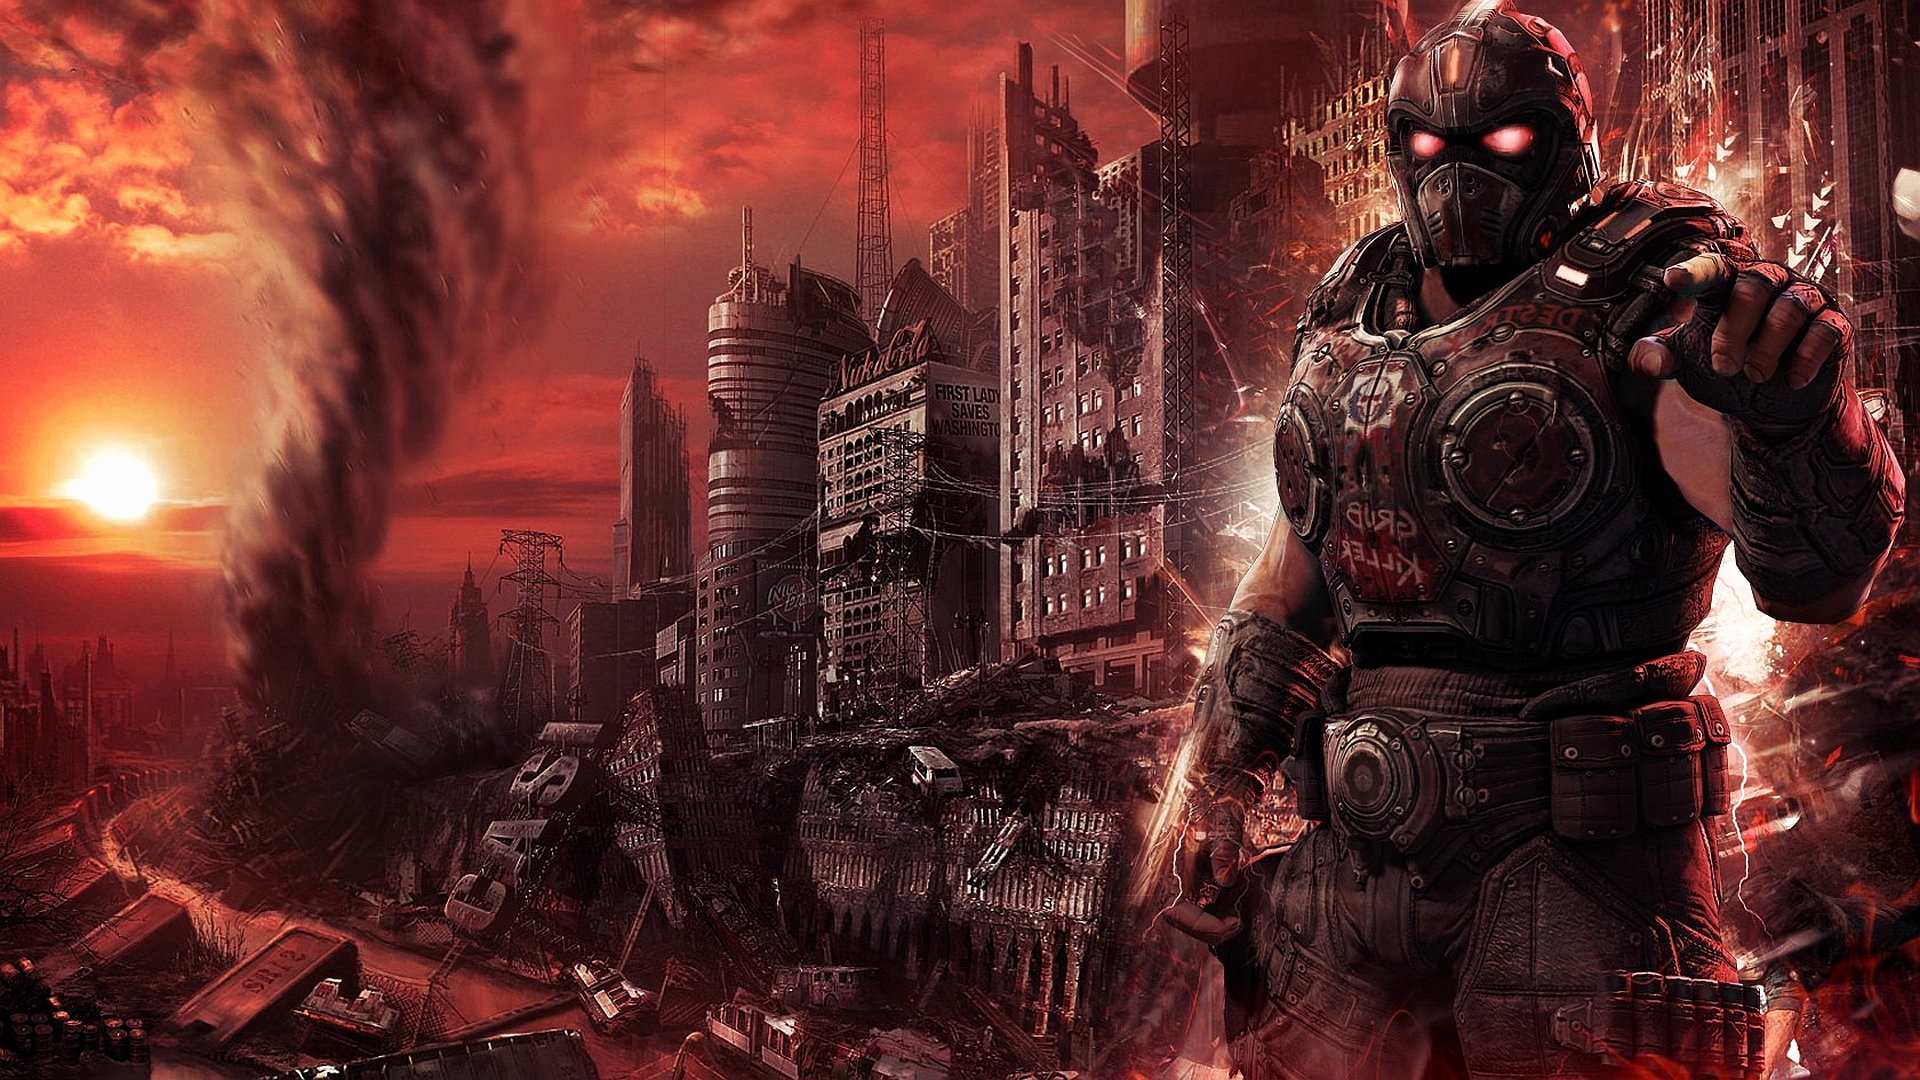 fallout 4 wallpaper,action adventure game,pc game,strategy video game,adventure game,cg artwork